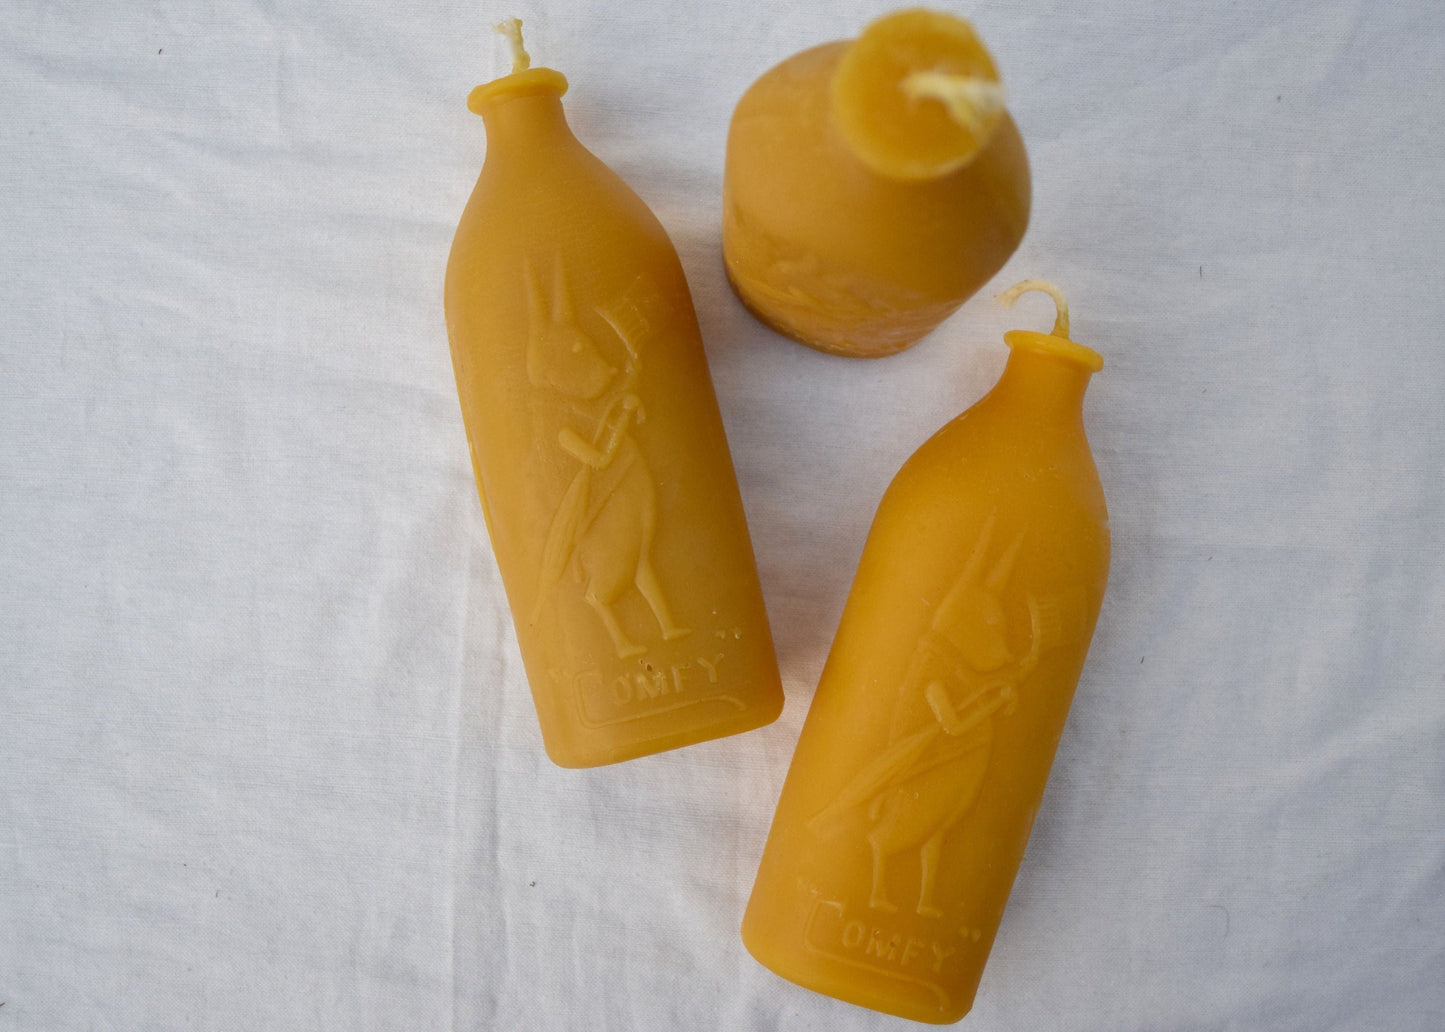 Vintage Bottle Candle - Beeswax Candle - Antique Rabbit Bottle Candle in Pure Beeswax - Vintage Baby Bottle from early 1900s - Bottle Candle, Burnable Bottle, Beeswax, Candle